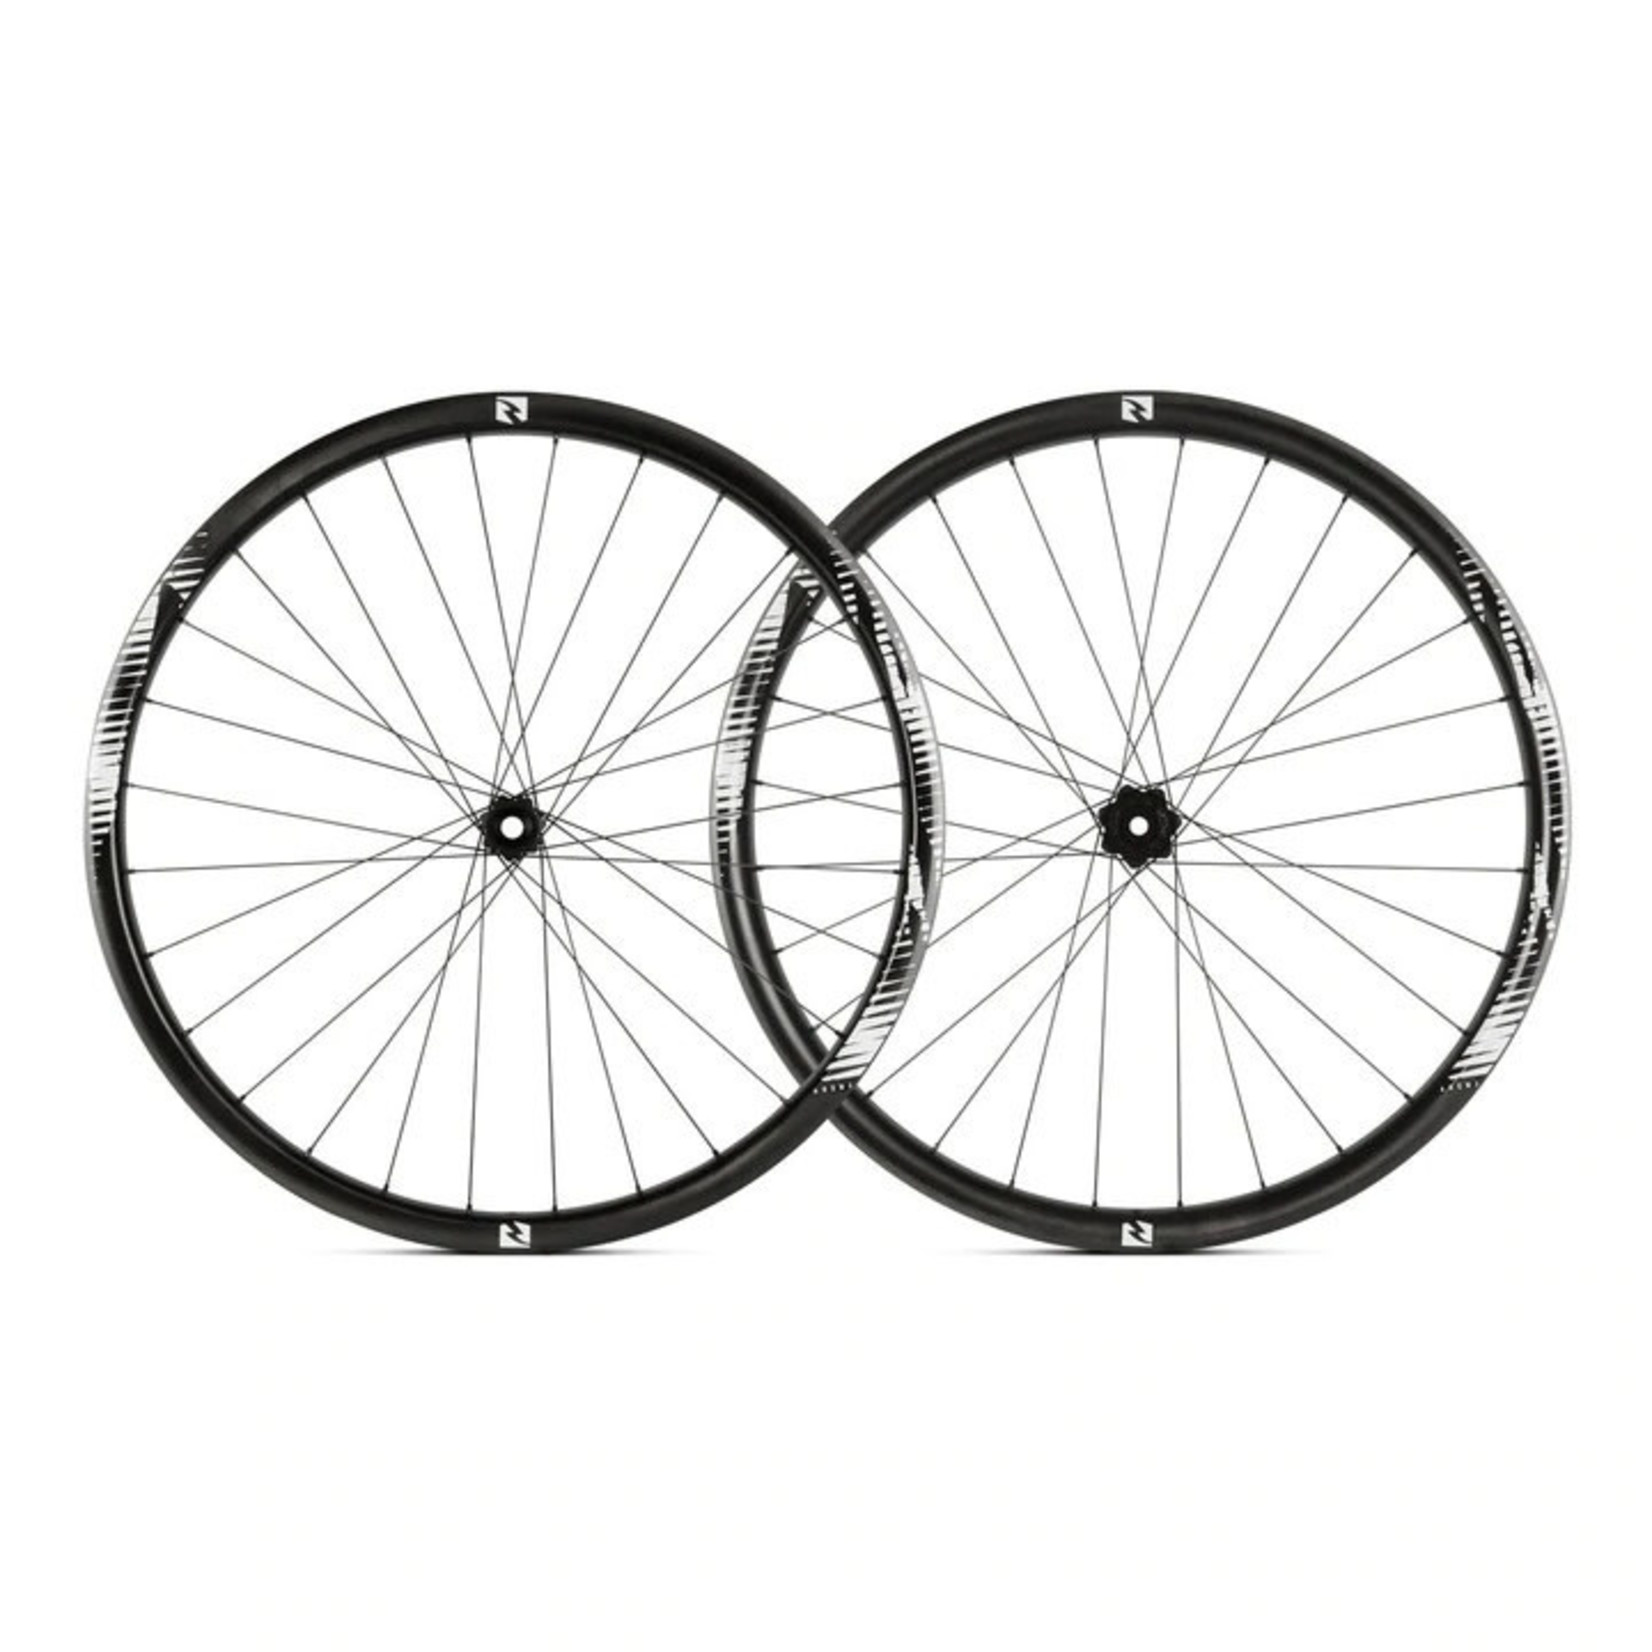 Hayes Reynolds TR 309 - Carbon Mountain Bike Non-Boost Wheelset - 100/142